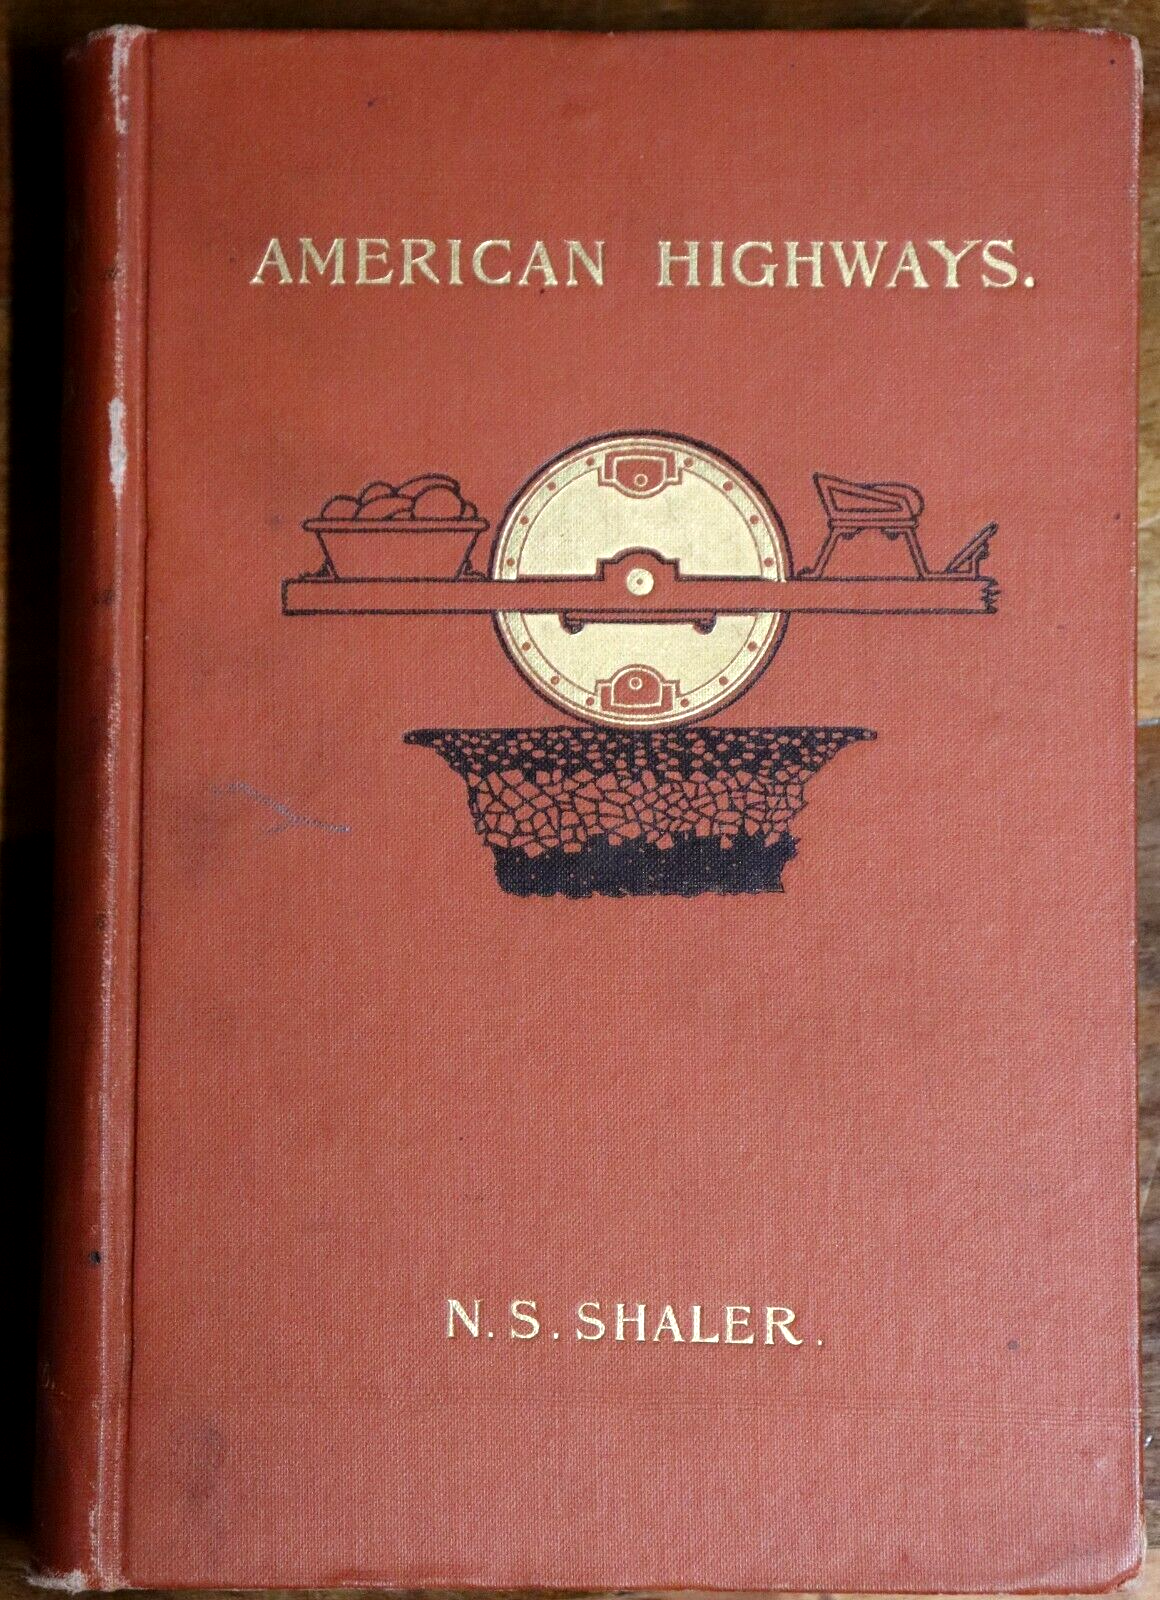 American Highways by N.S. Shaler - 1896 - Antique American History Book 1st Ed.